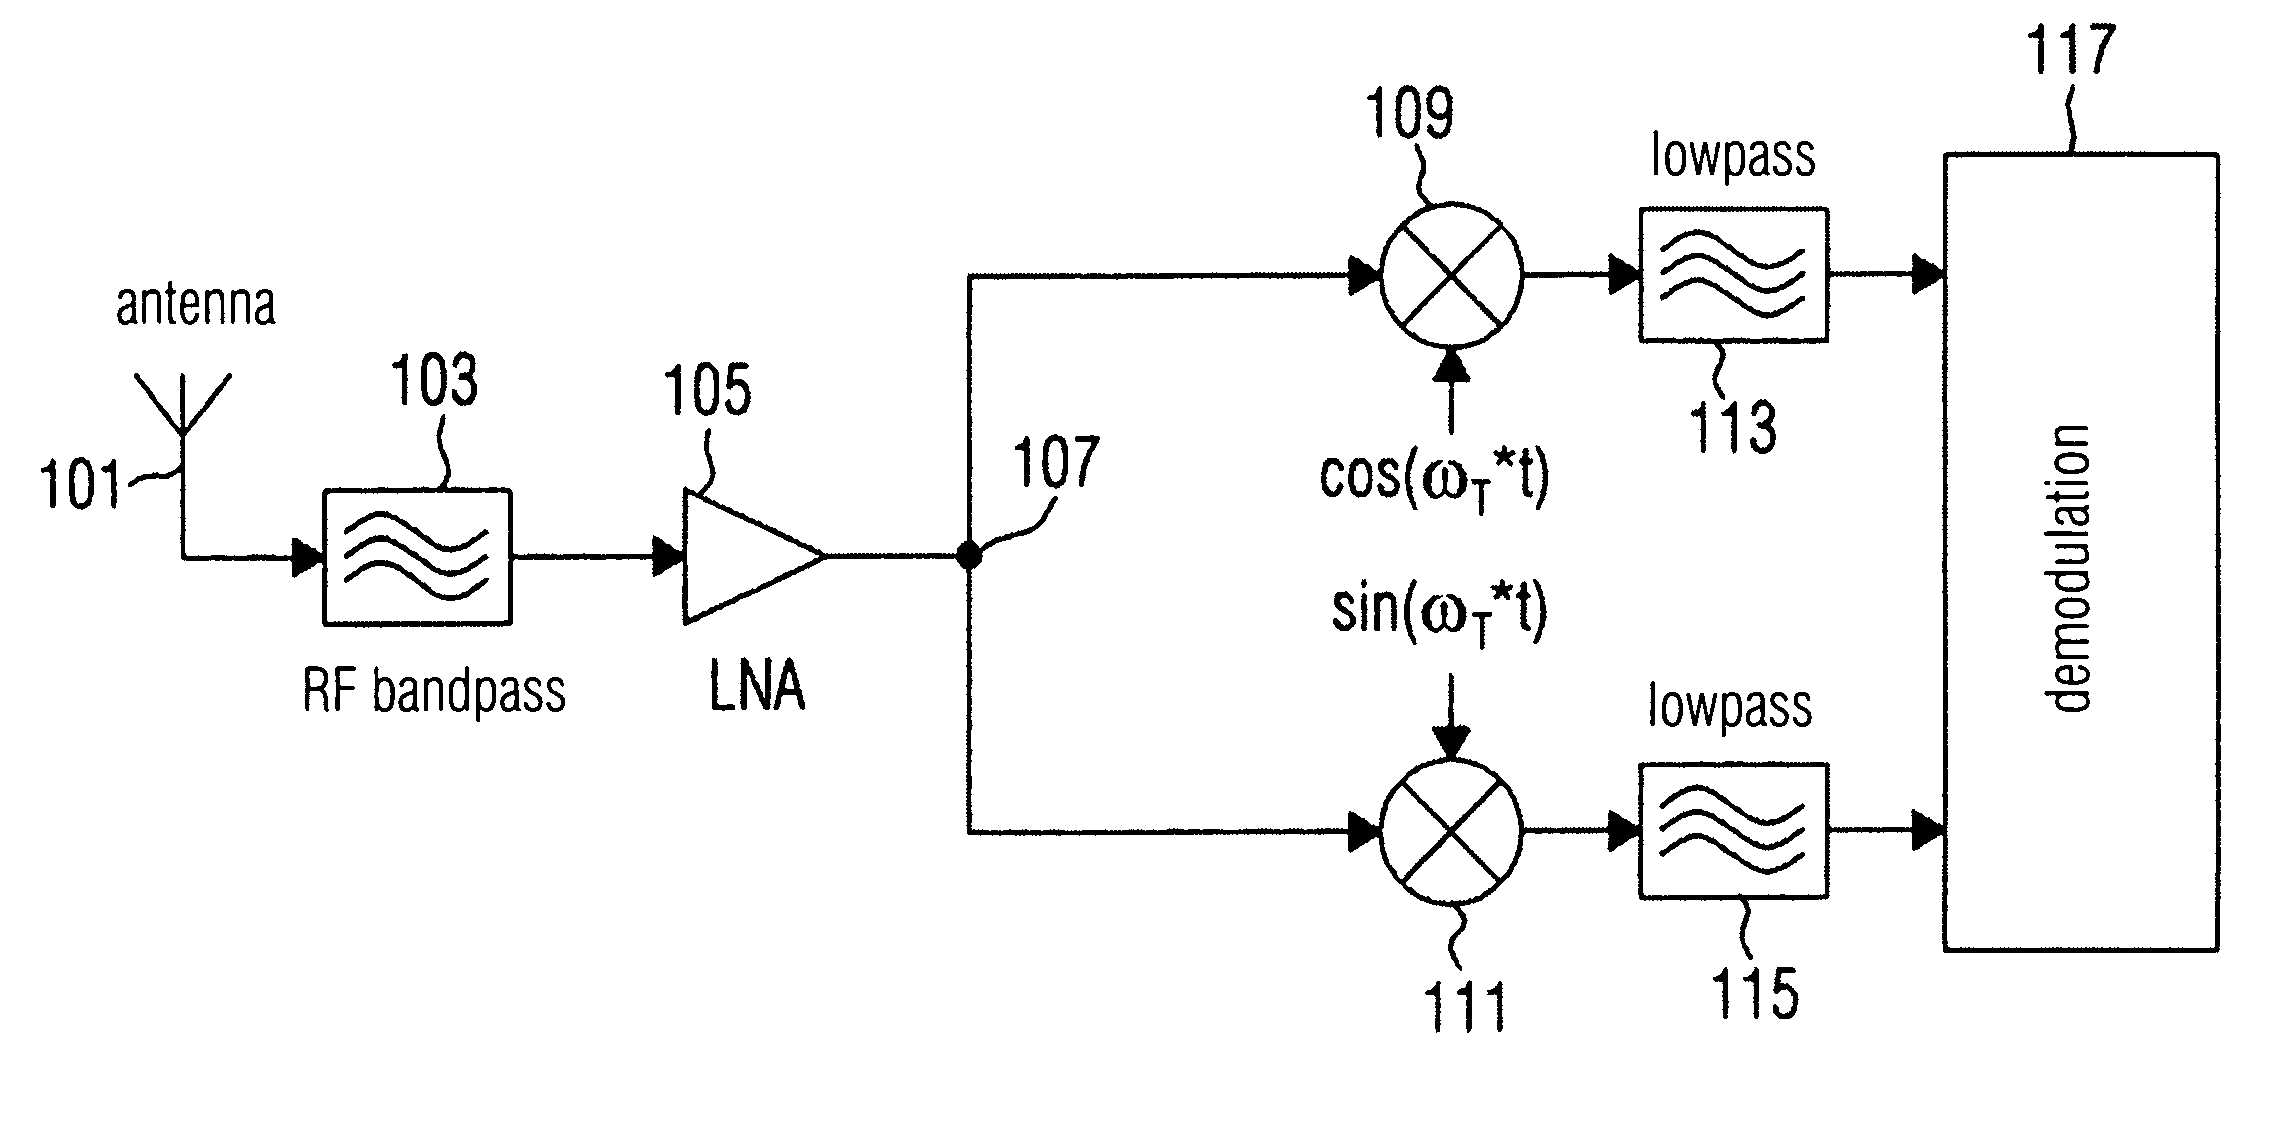 Apparatus and method for downward mixing an input signal into an output signal